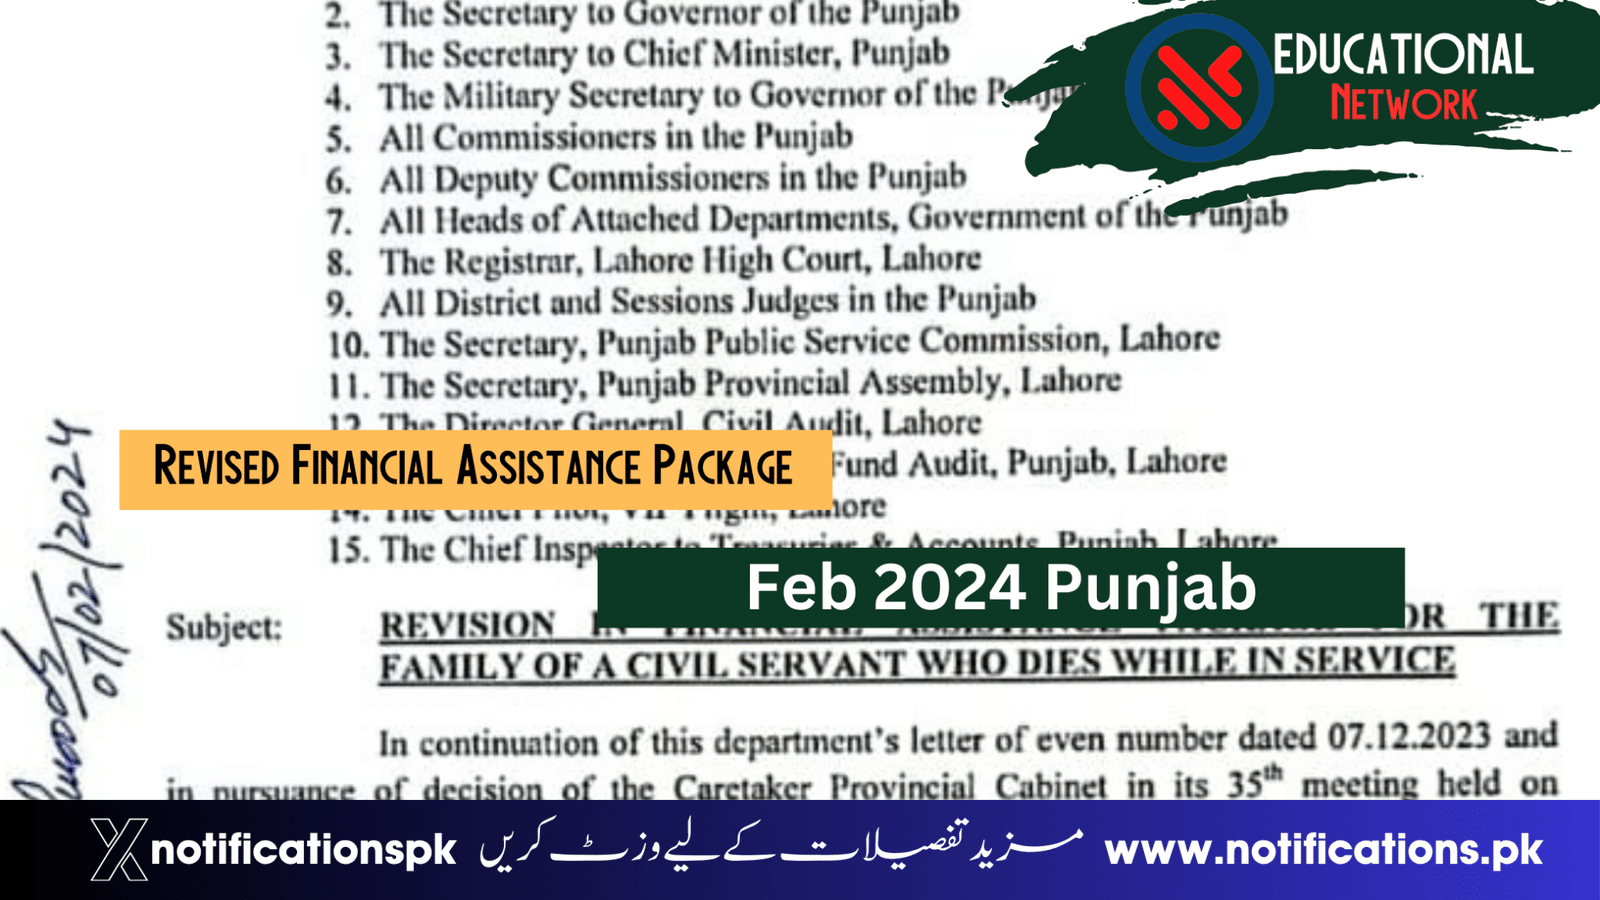 Notification Revised Financial Assistance Package Feb 2024 Punjab